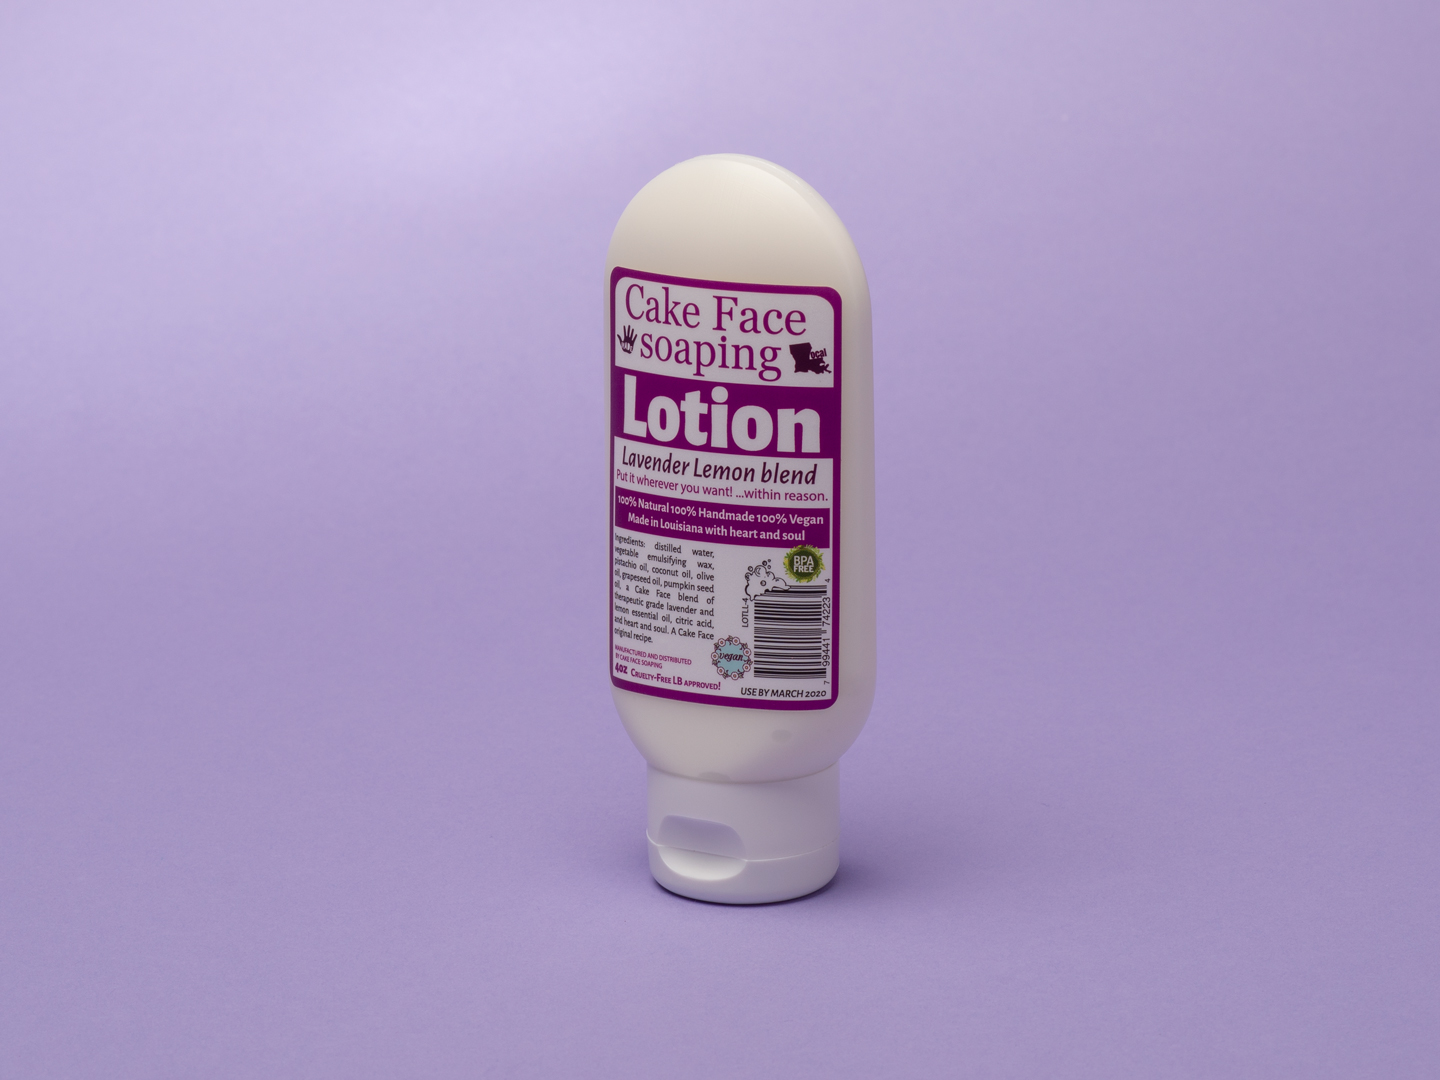 Cake Face Soaping Lotion